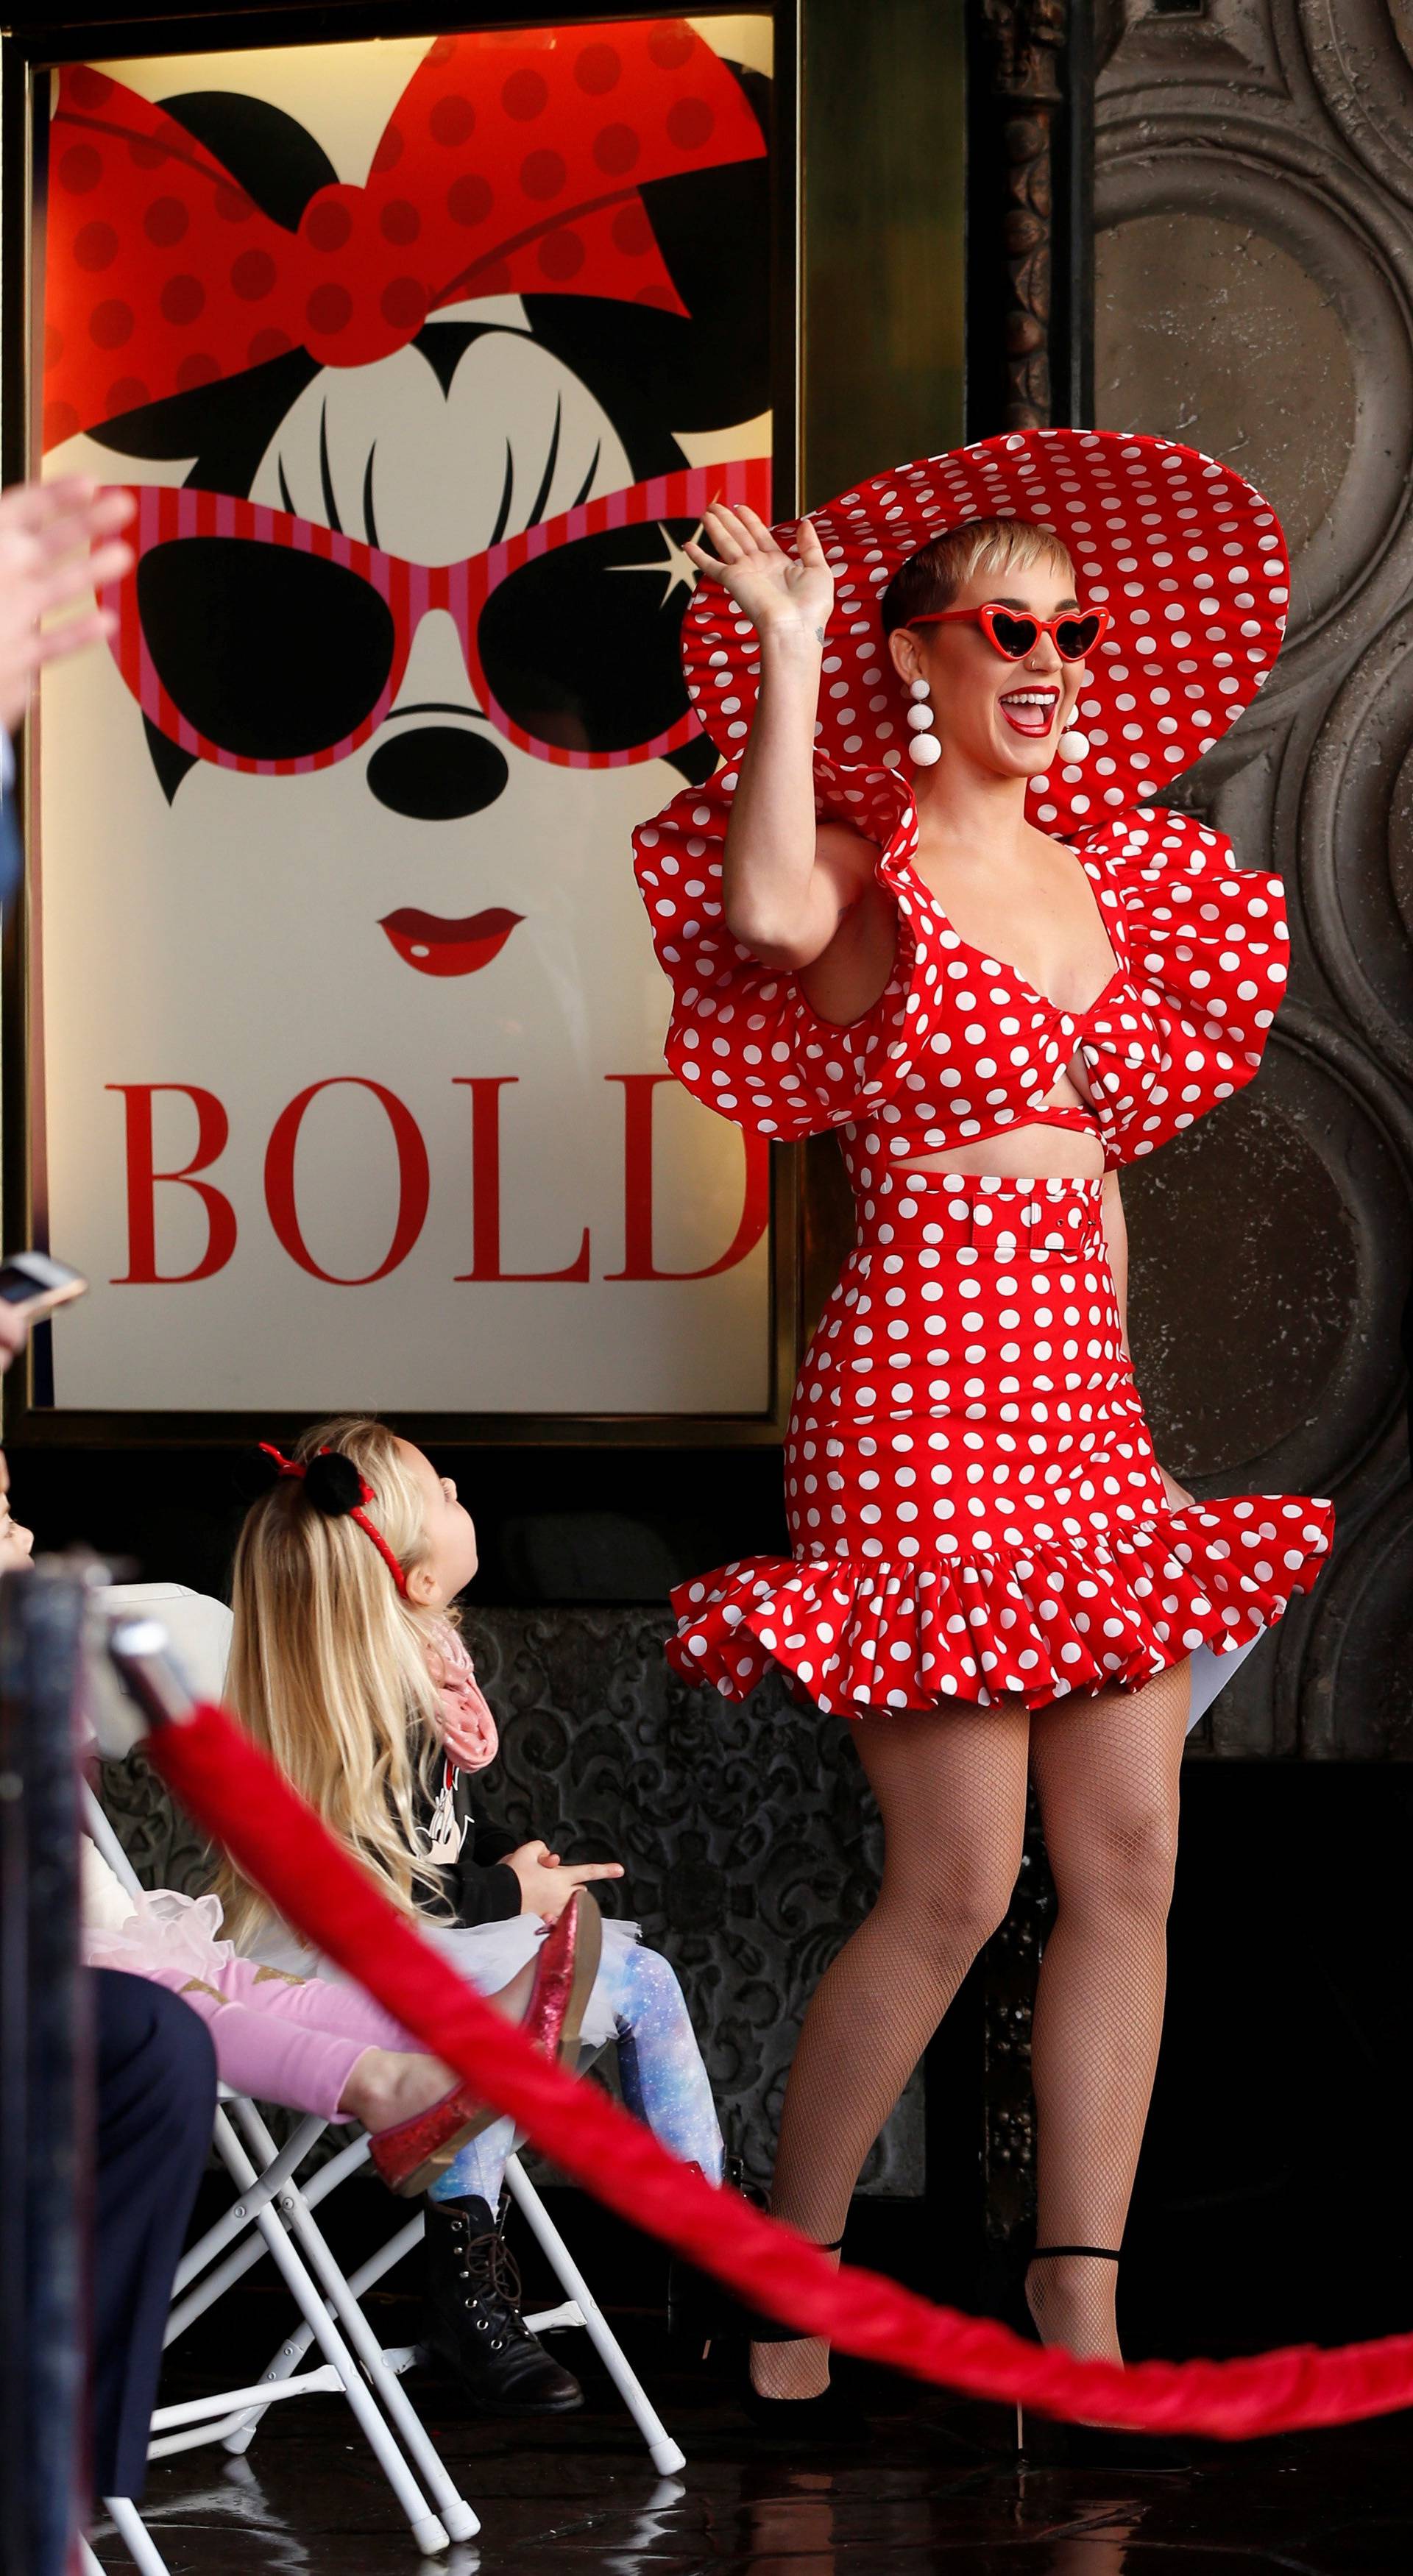 Singer Perry attends the unveiling of the star for Minnie Mouse on the Hollywood Walk of Fame in Los Angeles